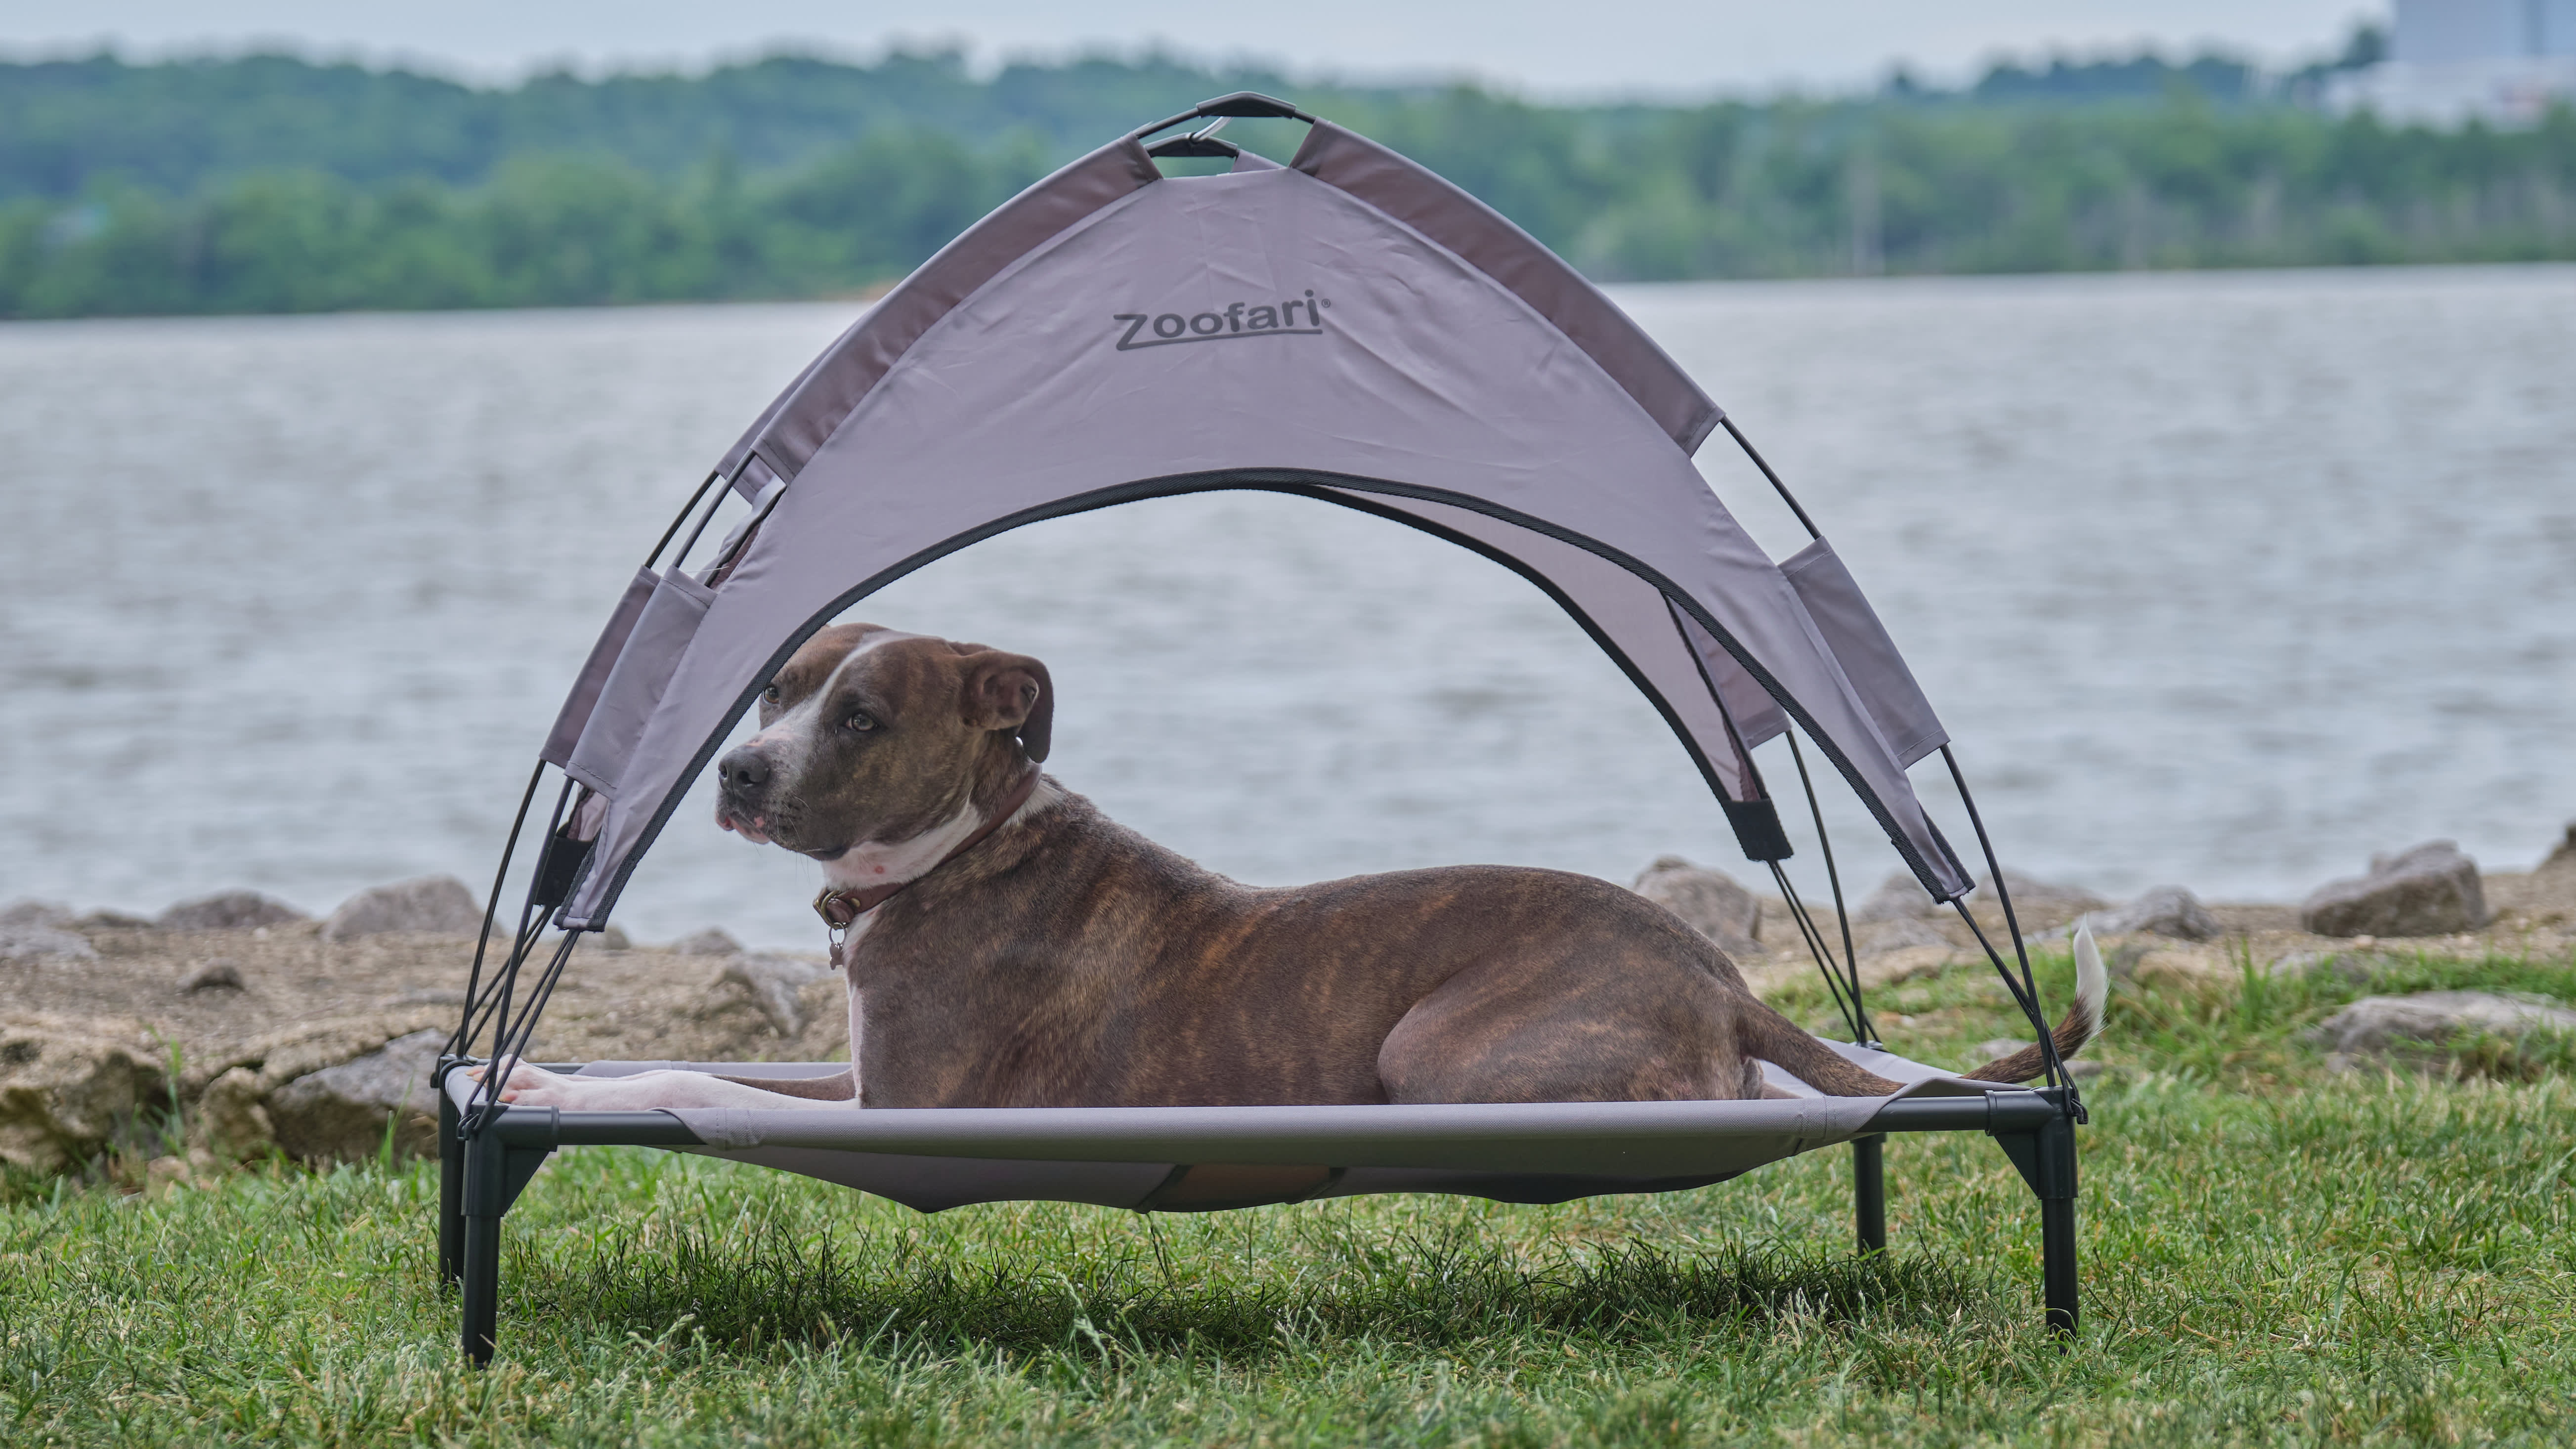 Lidl Has Brought Back Its Dog Canopy Bed So Pup Can Enjoy Summer In Style | Apartment Therapy